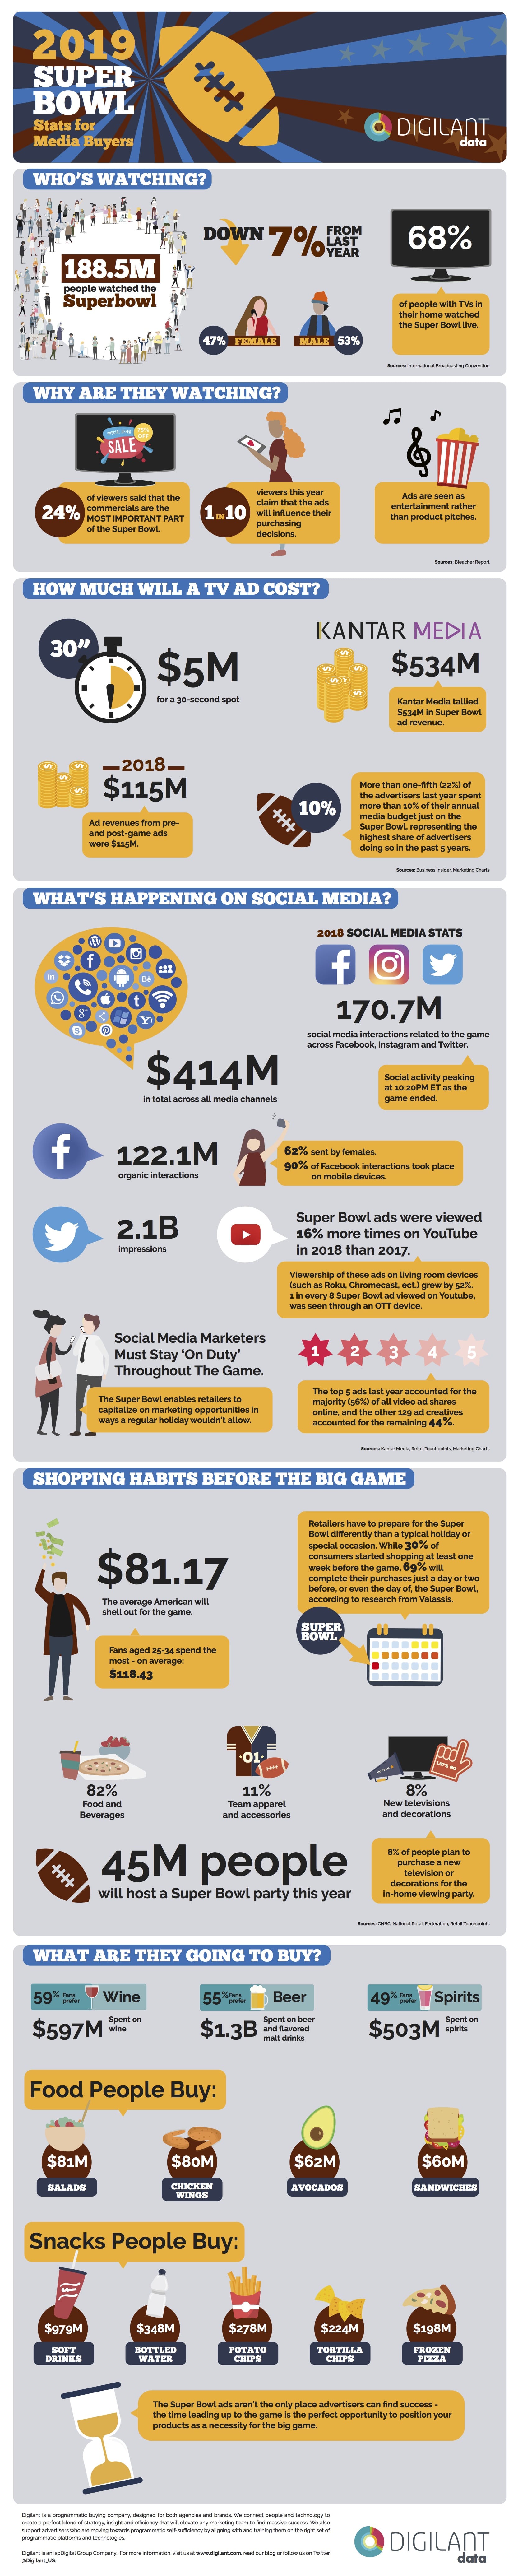 Super Bowl 2019—advertising and shopping stats for digital media buyers